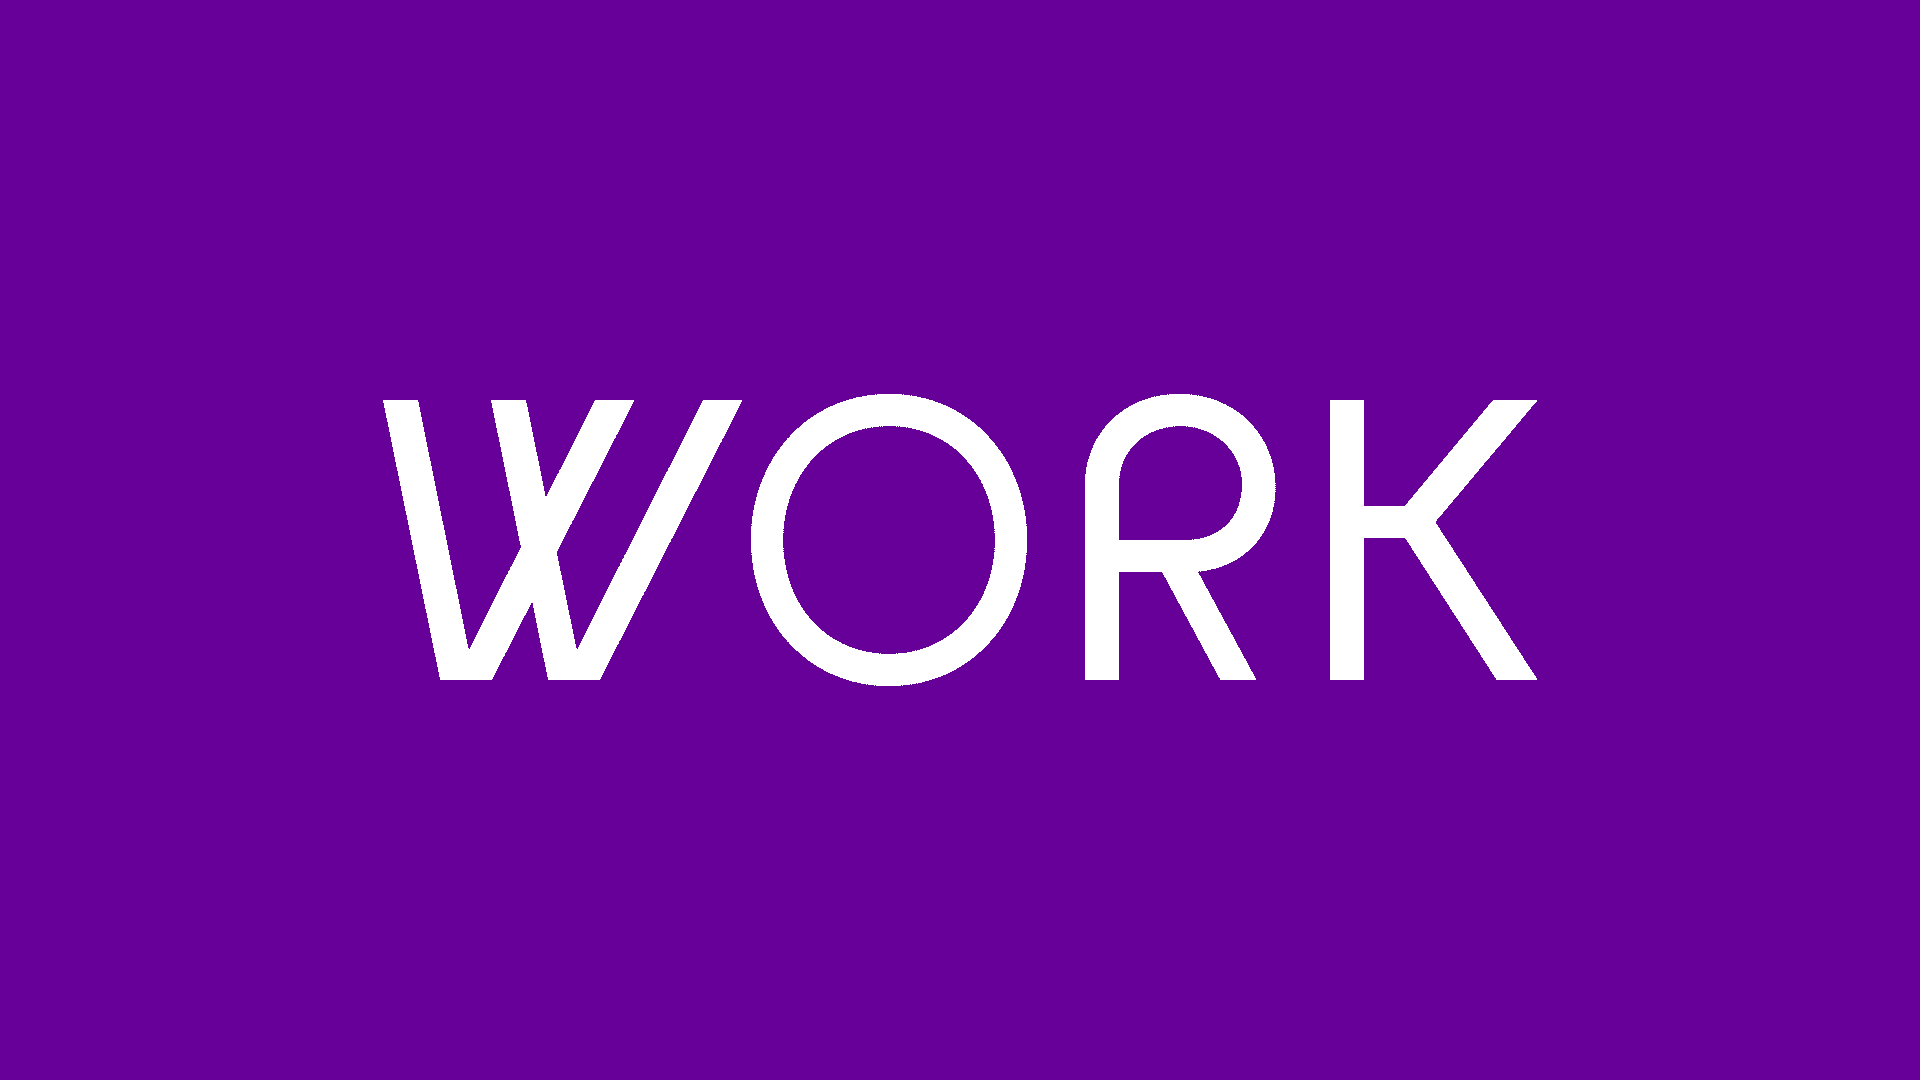 Factory 2.0: Workshopping Access. Gif credit: Saverio Cantoni. Image description: rectangular animated gif scrolling white words on solid purple background. The following words are on the image: work, work, shop, shop, shopping!, shopping!, access, workshopping access. The animation loop includes arrows and chaotic letterings.